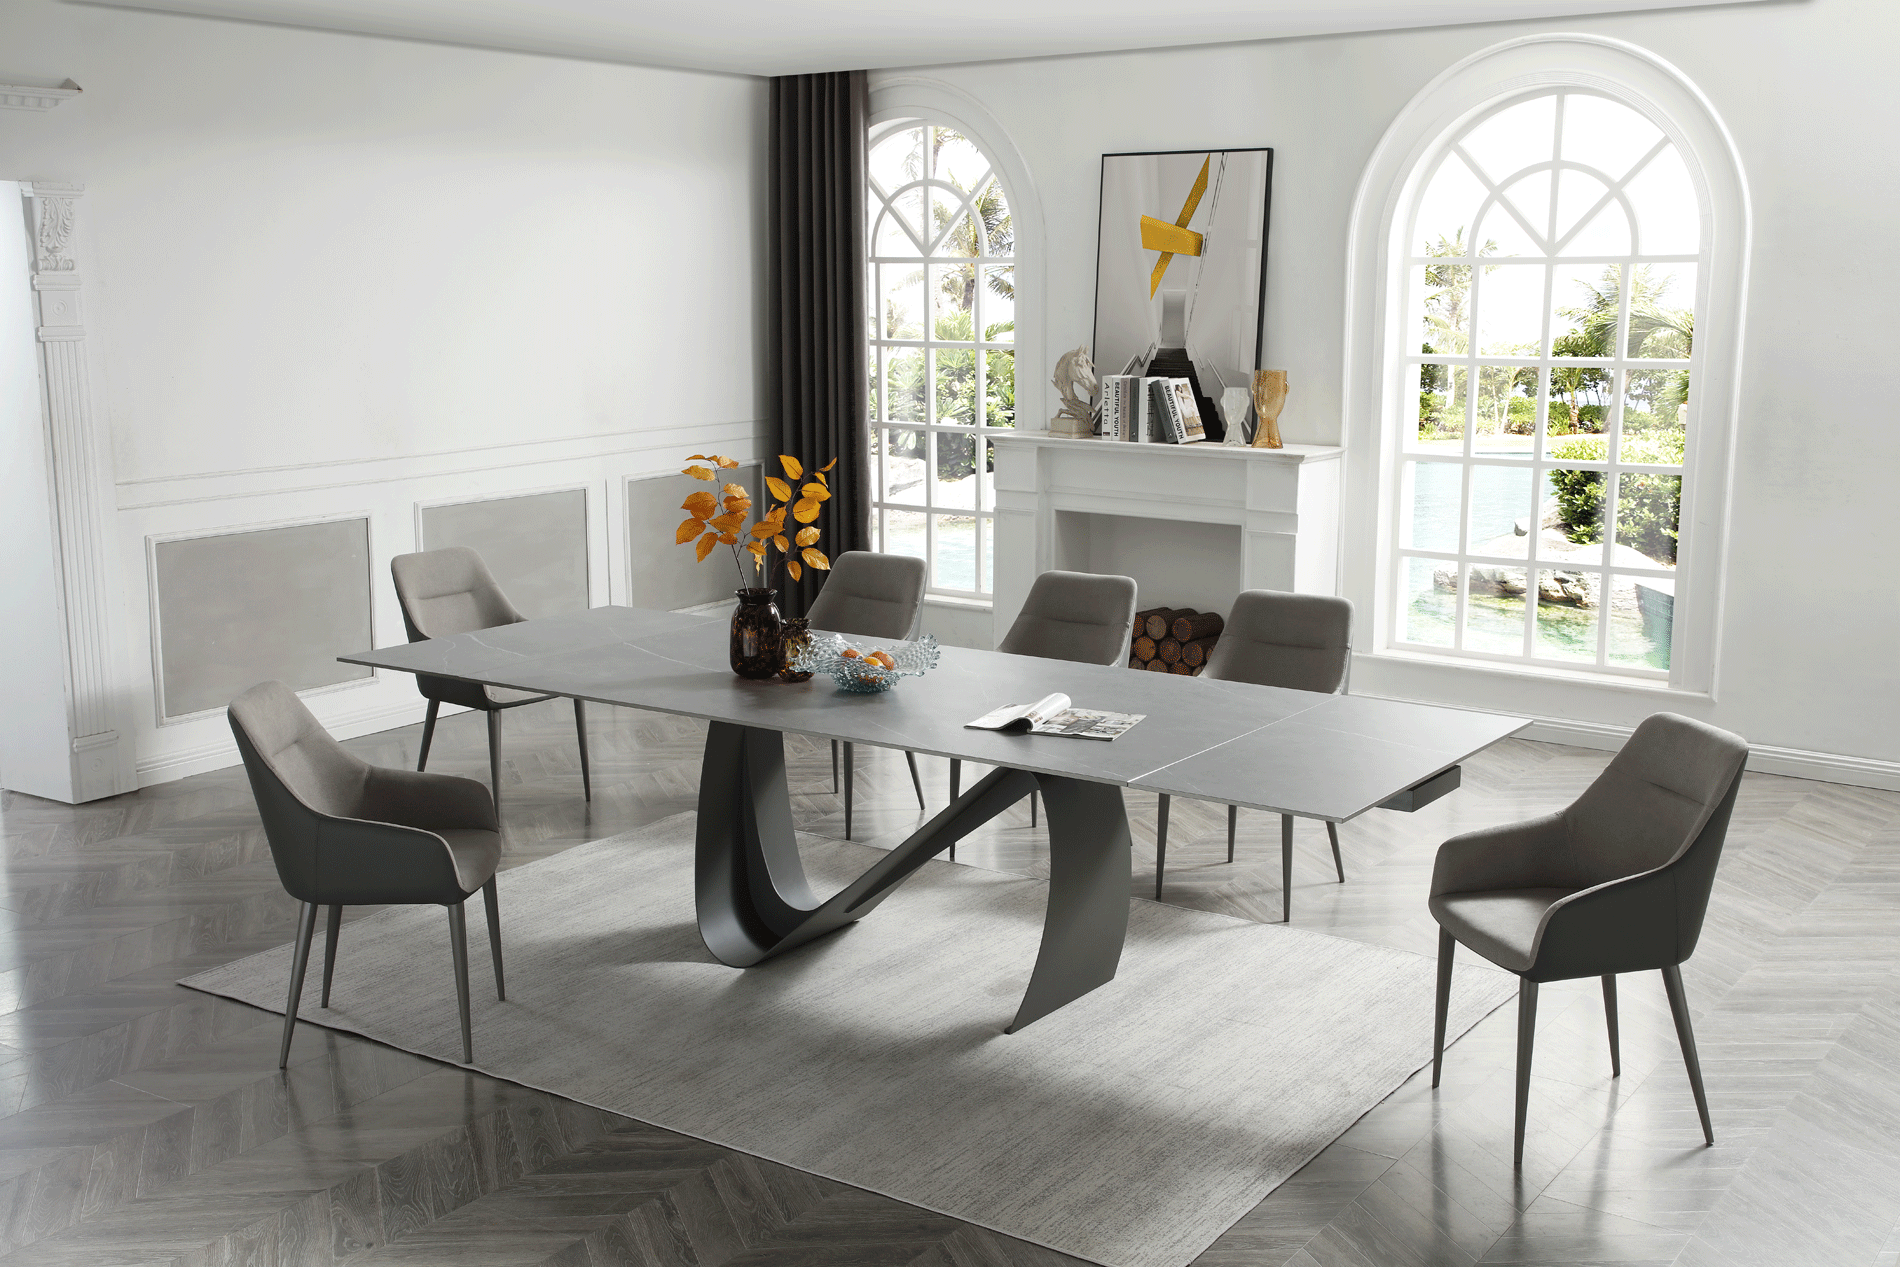 Living Room Furniture Reclining and Sliding Seats Sets 9087 Table Dark grey with 1254 chairs